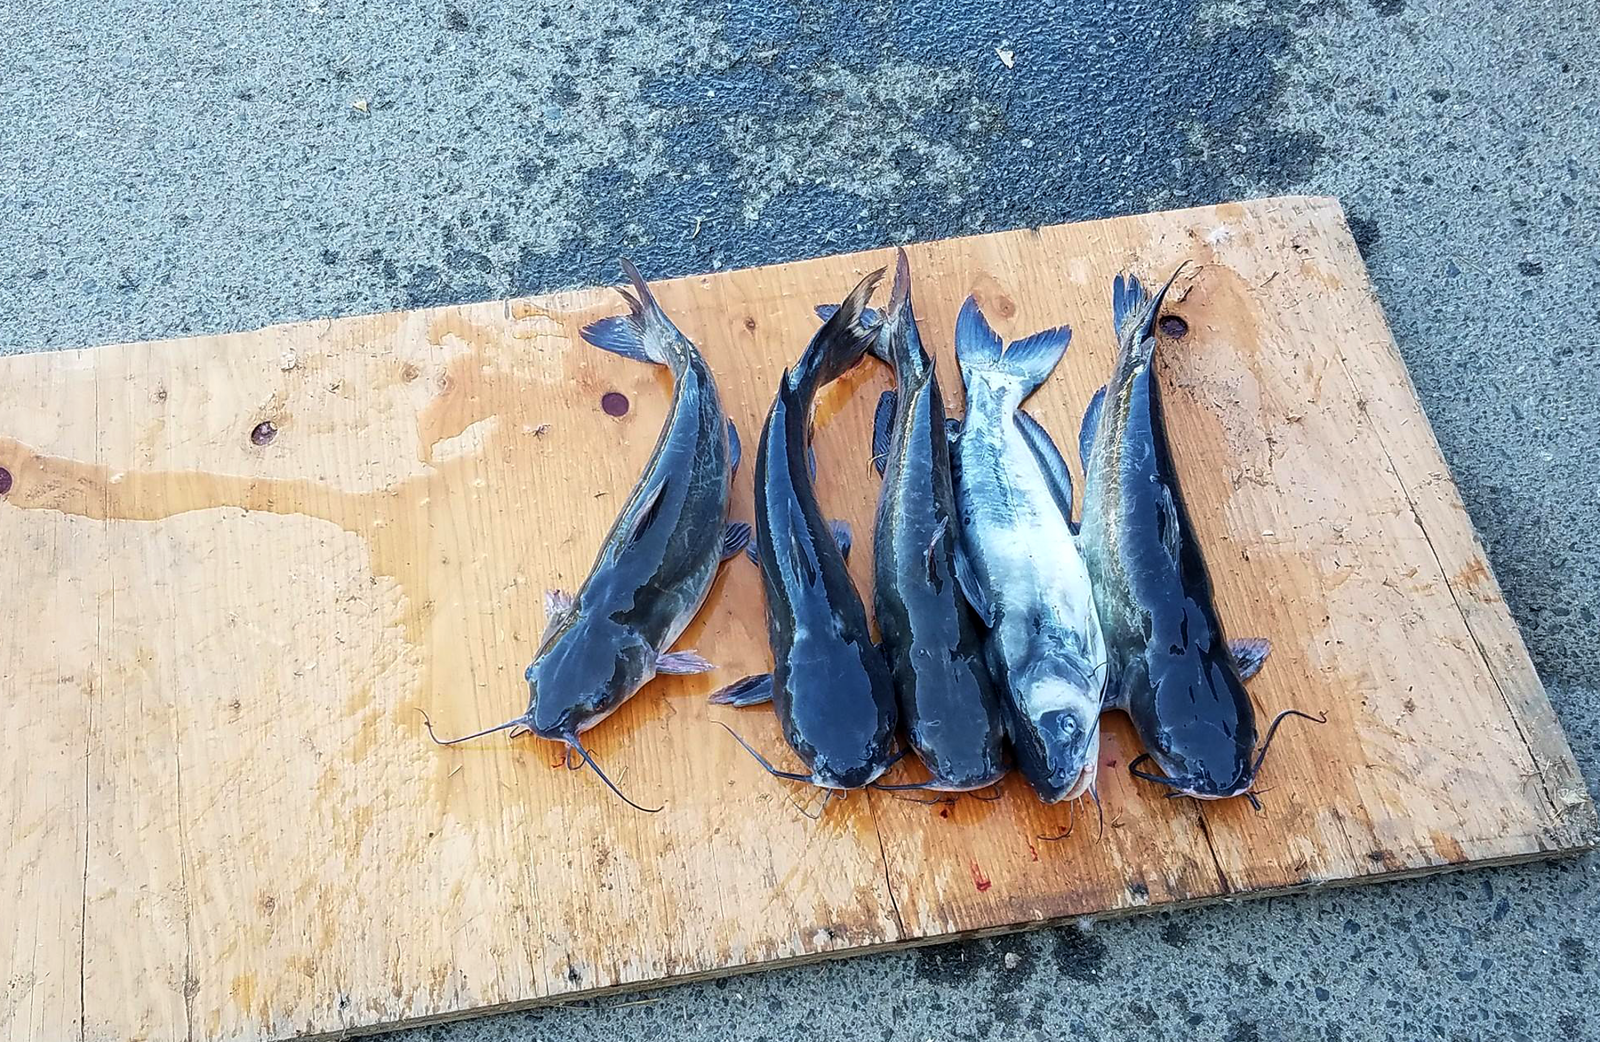 Five catfish lie on a cutting board after being caught at Prado park.